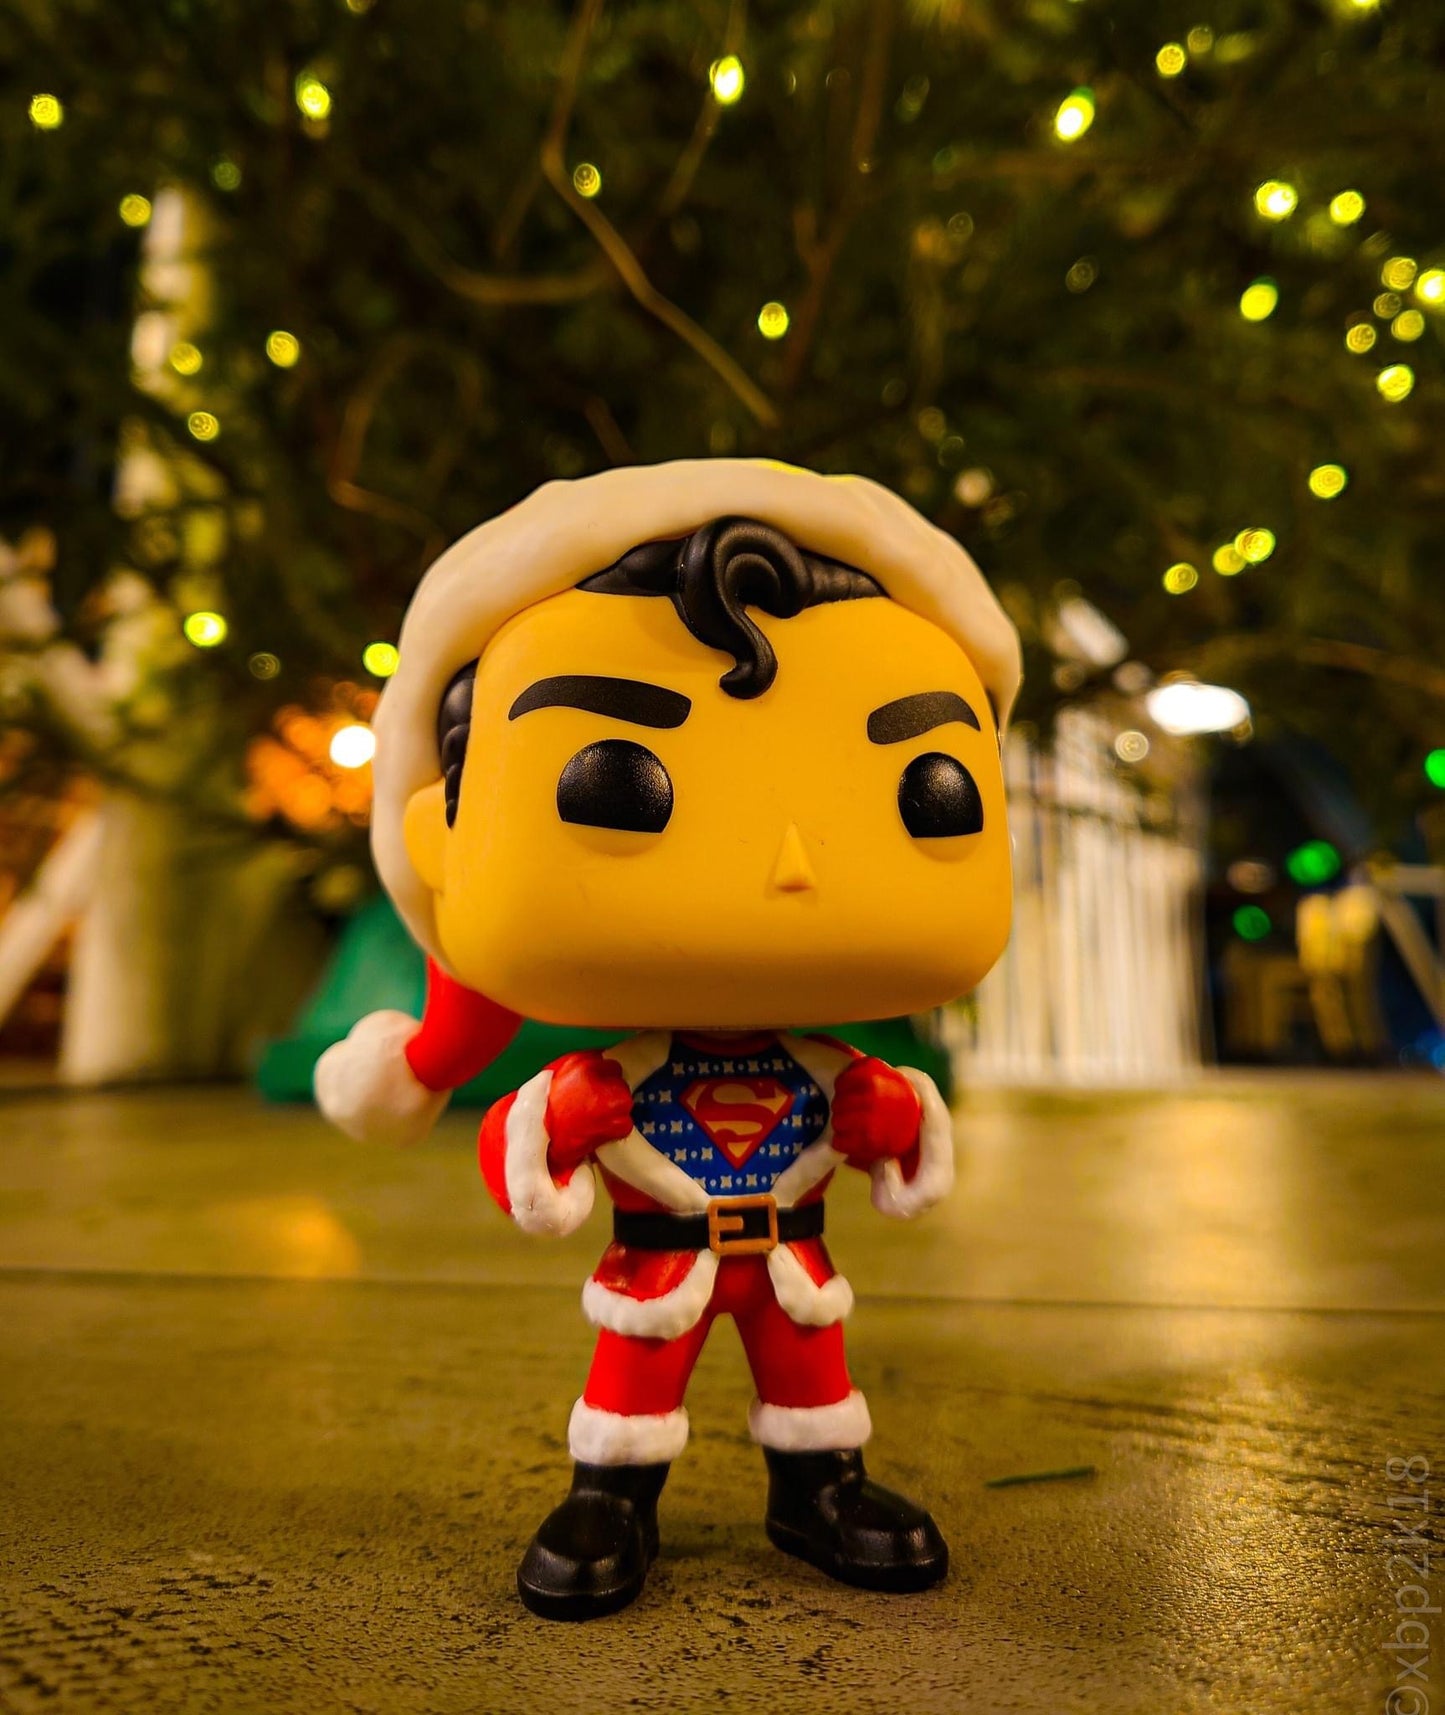 Superman with a Christmas sweater - DC Comics Holiday